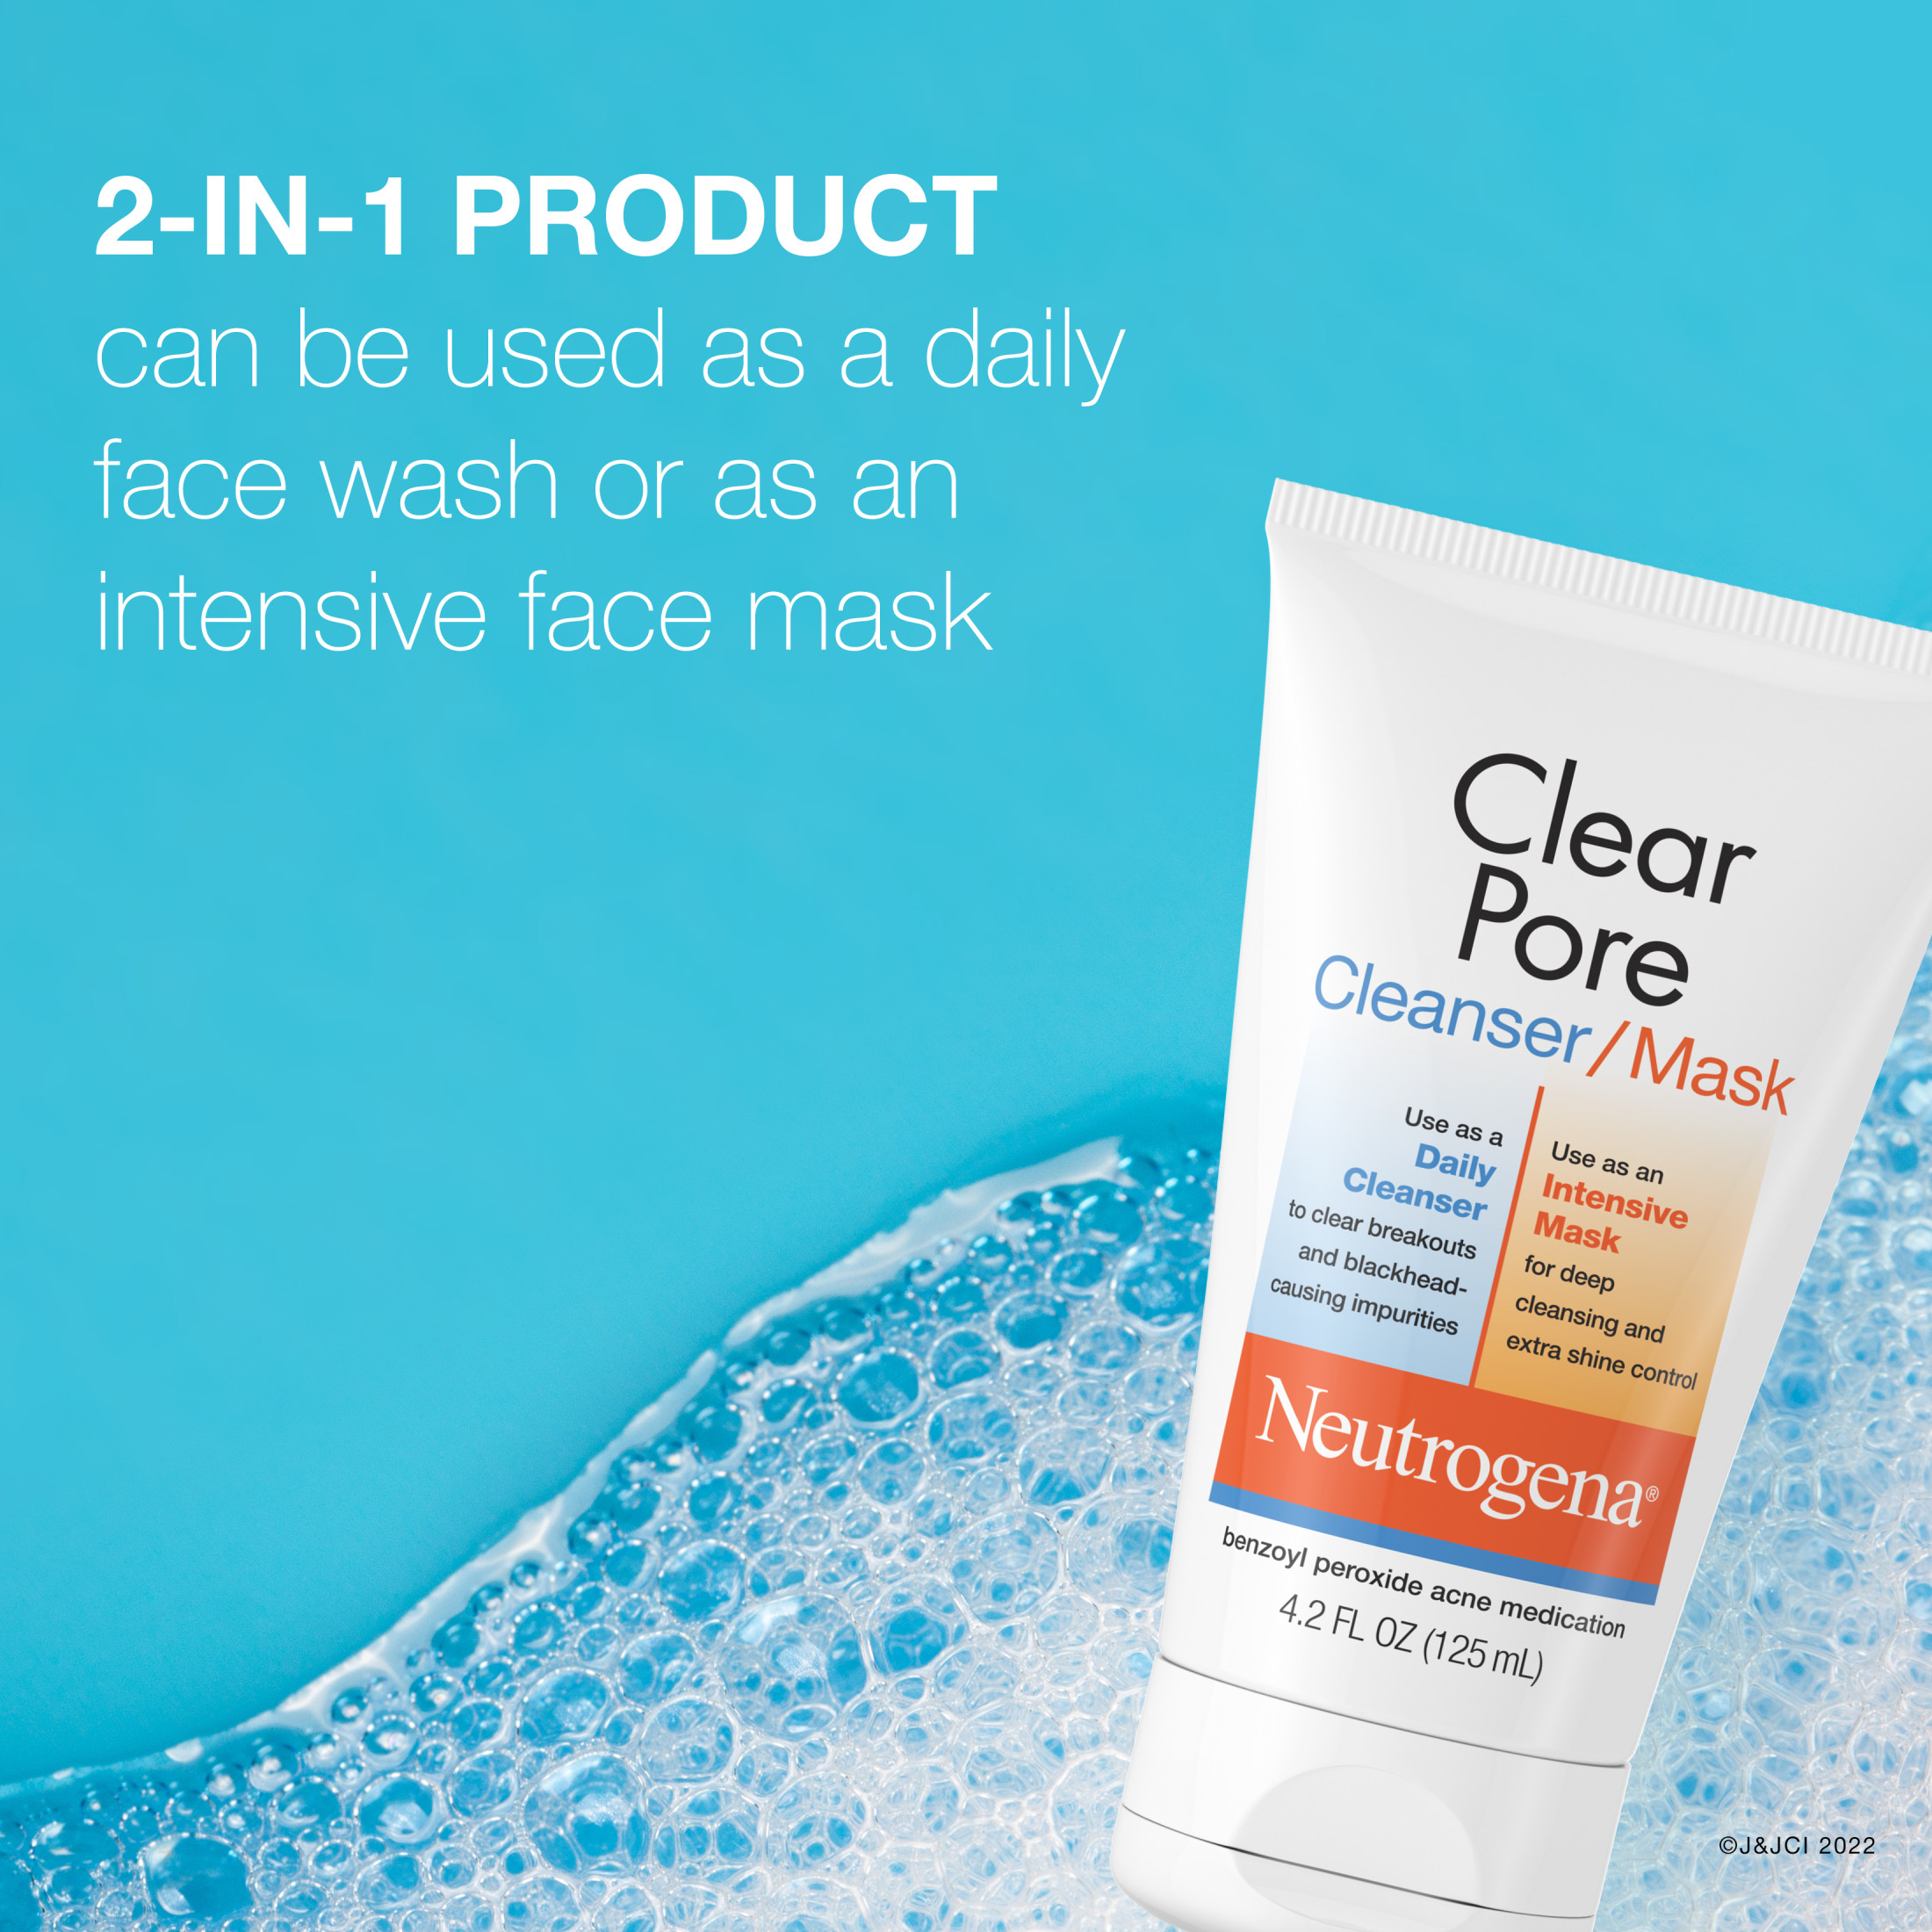 Neutrogena Clear Pore 2-in-1 Facial Cleanser & Clay Mask, 4.2 fl. oz - image 5 of 11